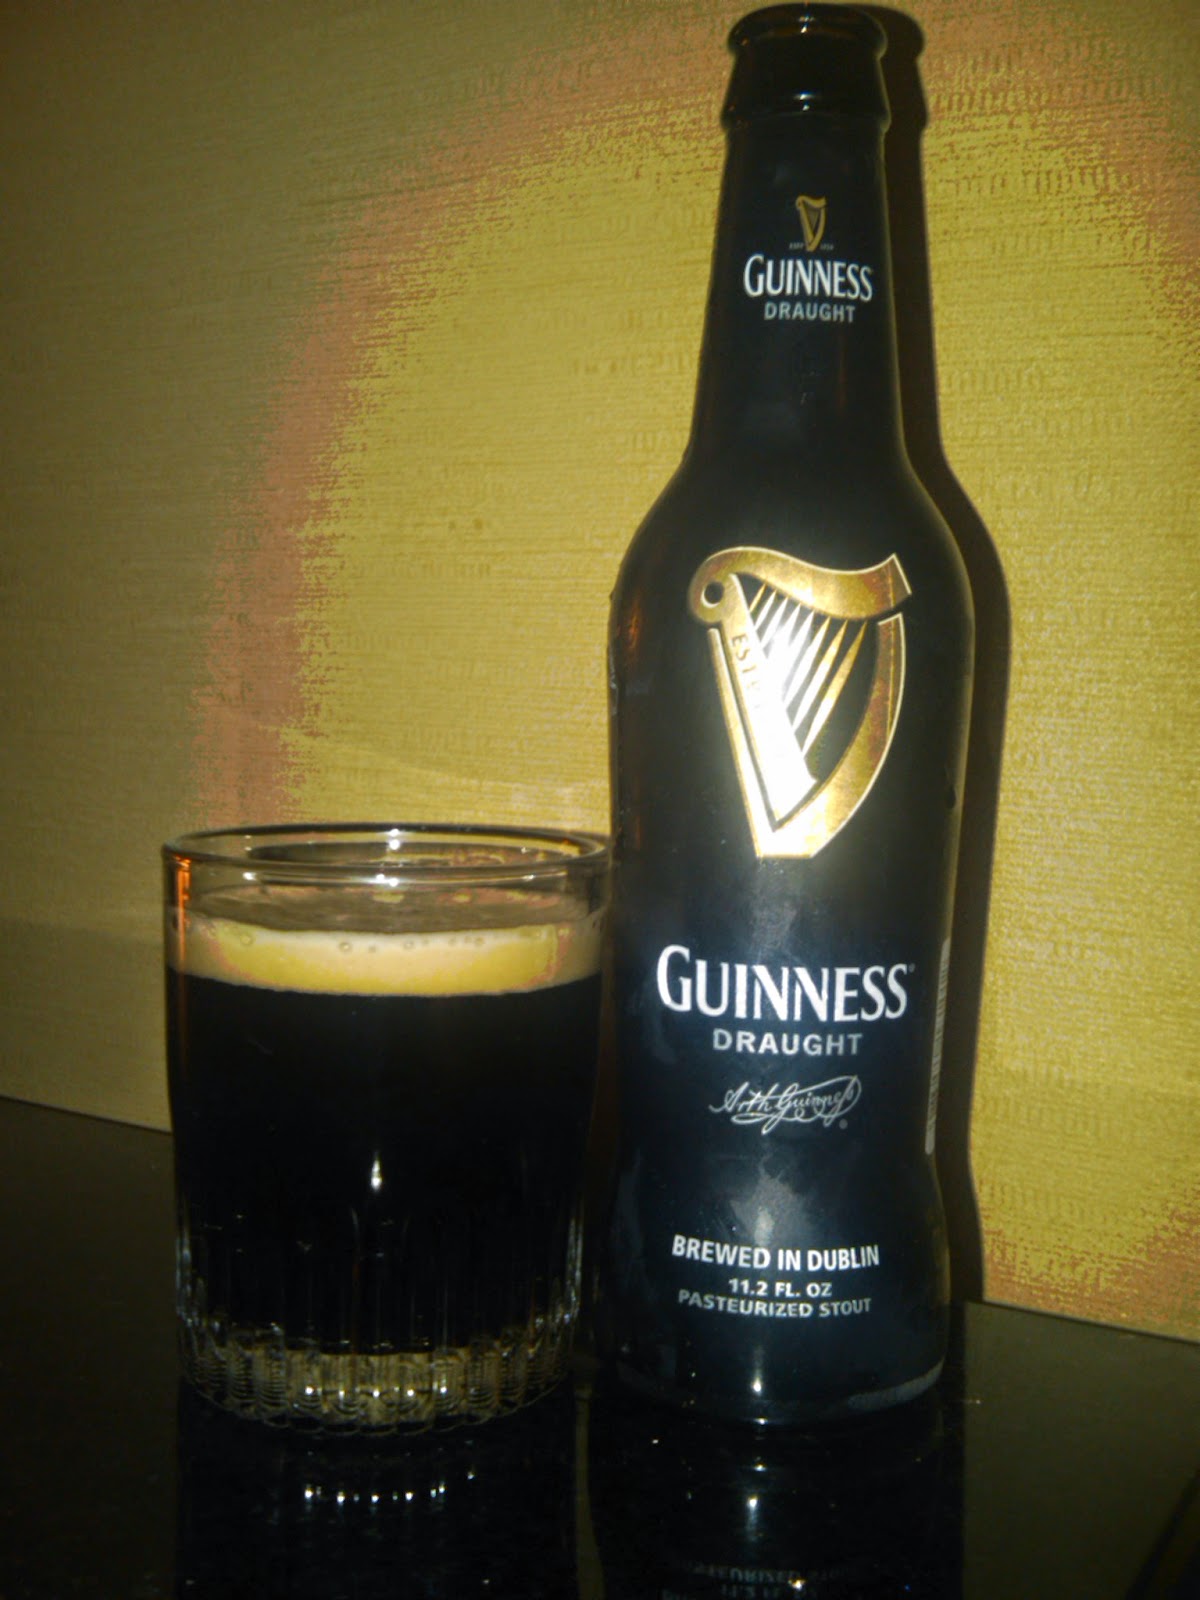 365 Days Of Beer: Guinness Draught Stout